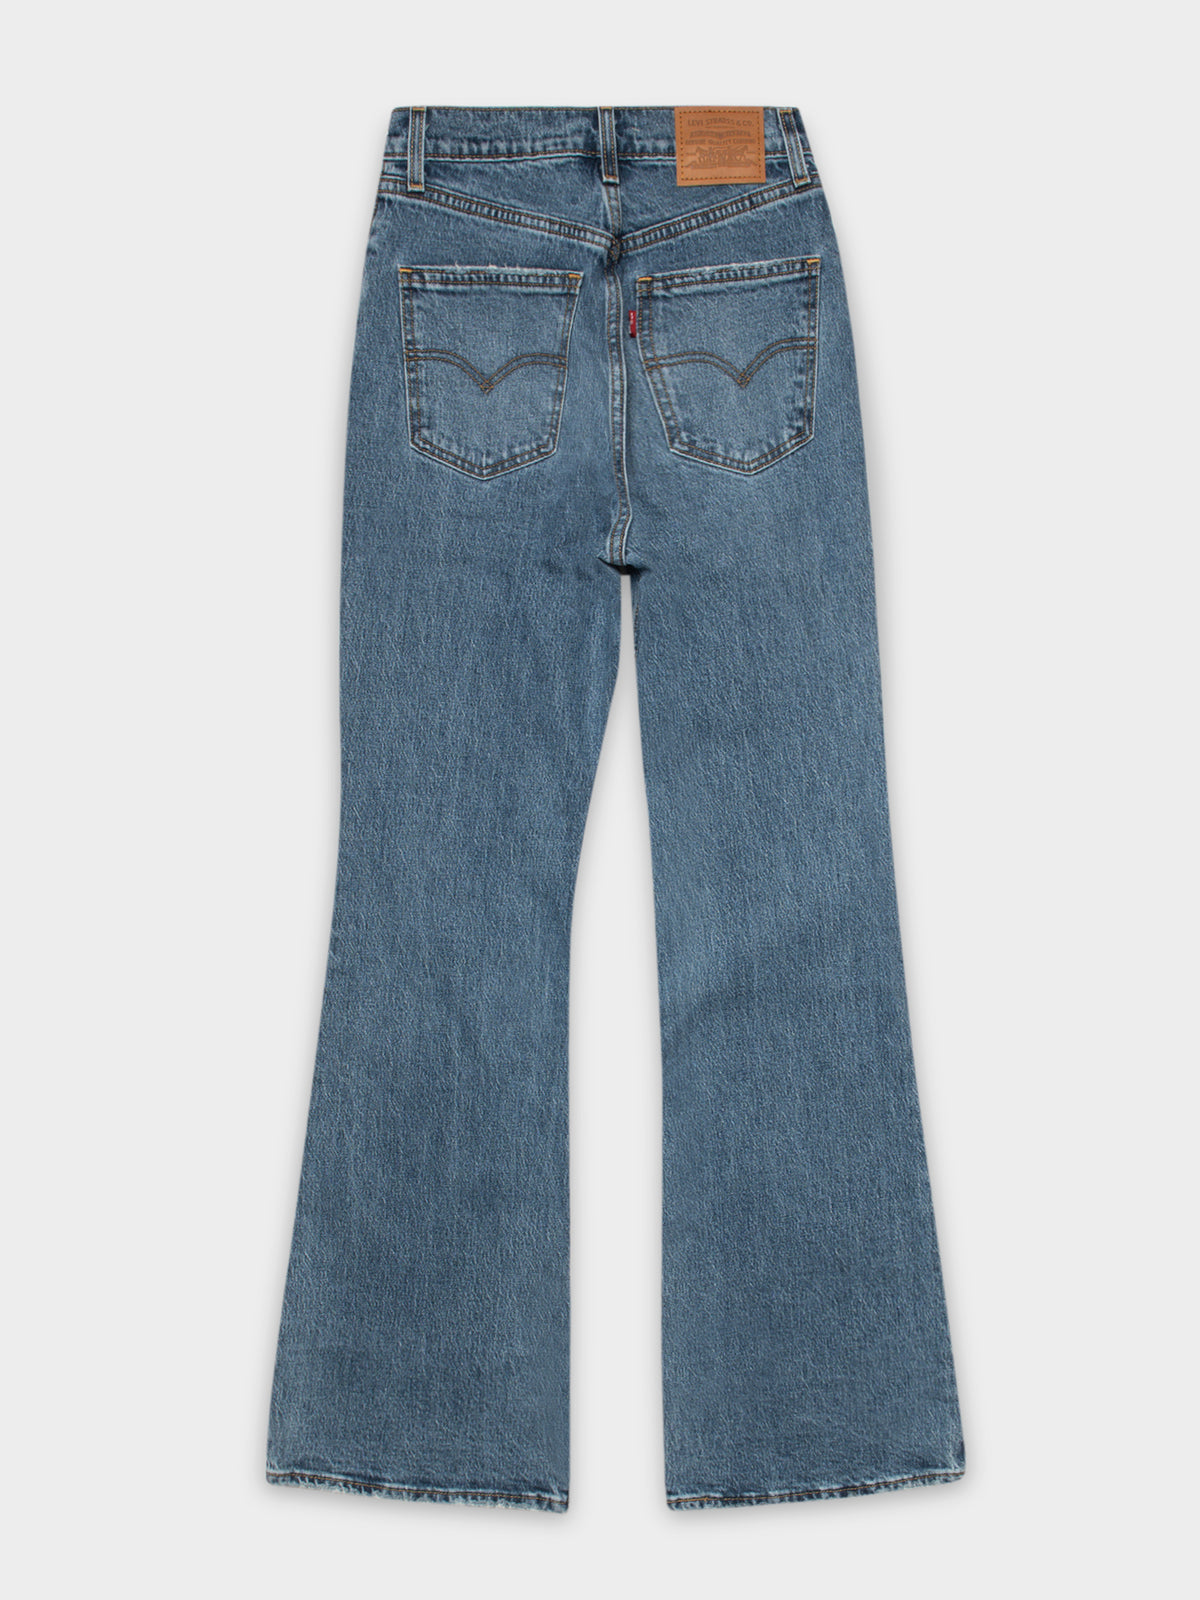 70s High Flare Jeans in Sonoma Walks